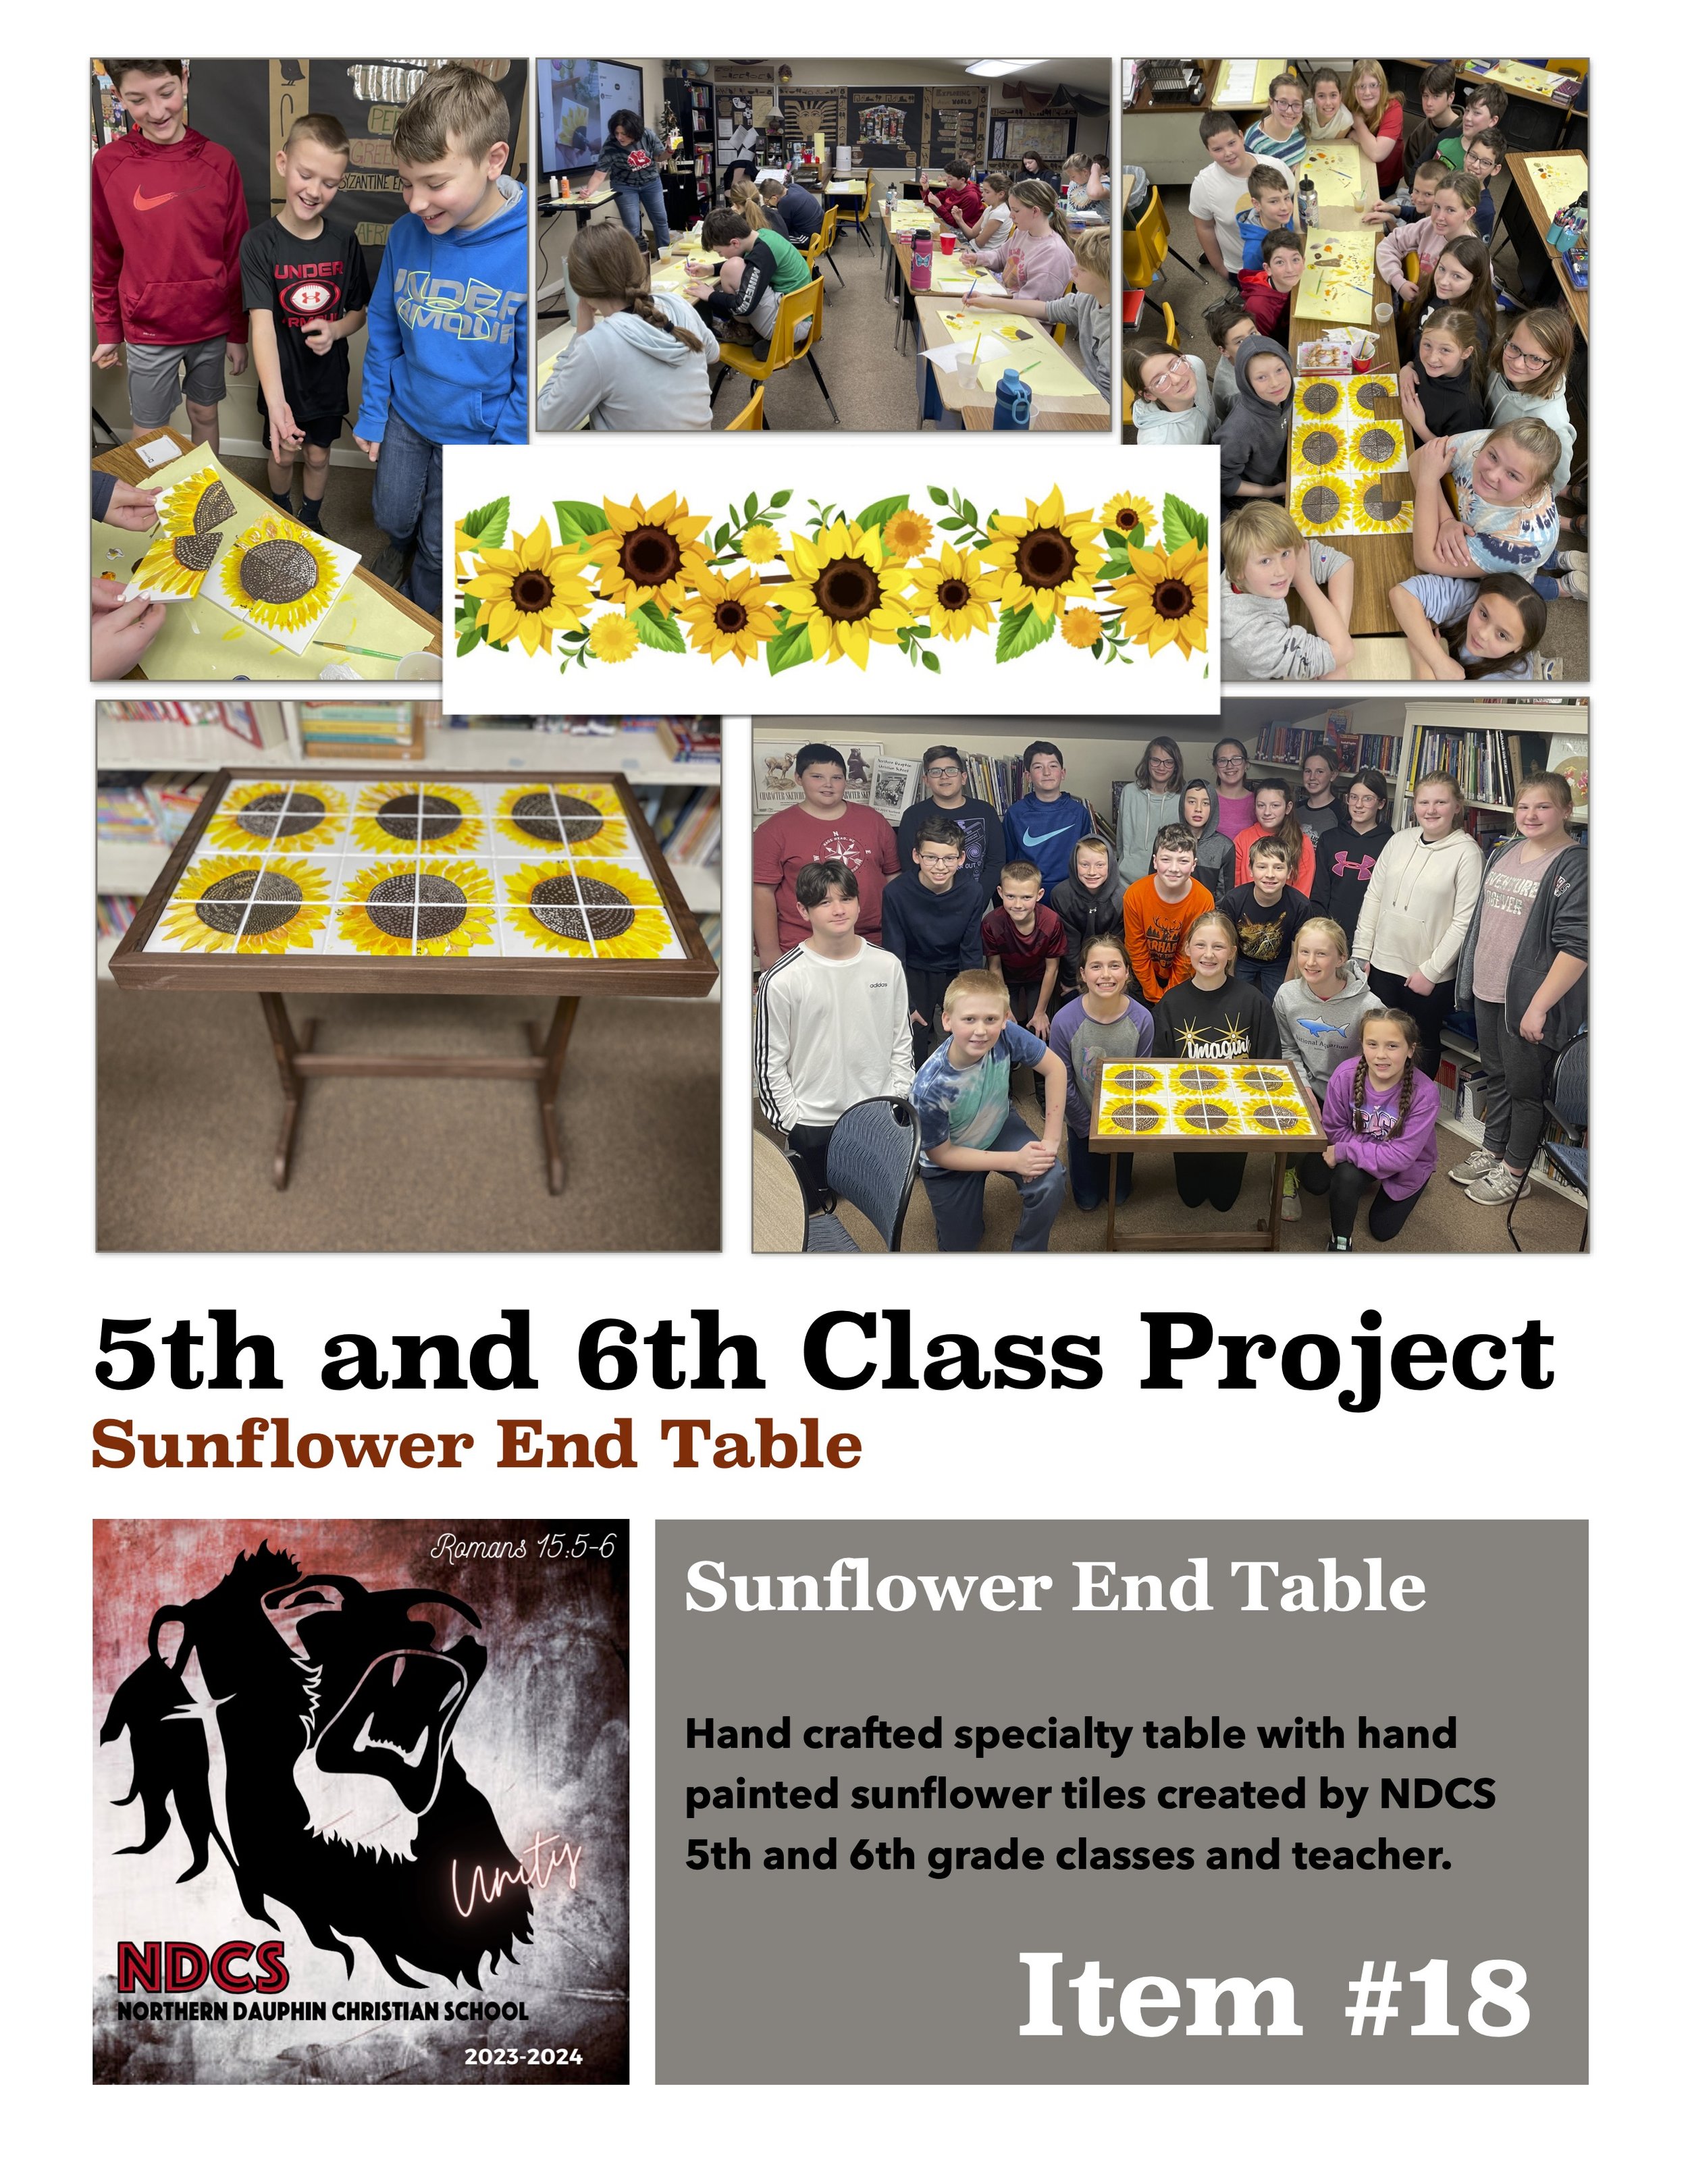 18 5th and 6th Grade Class Project 24.jpg